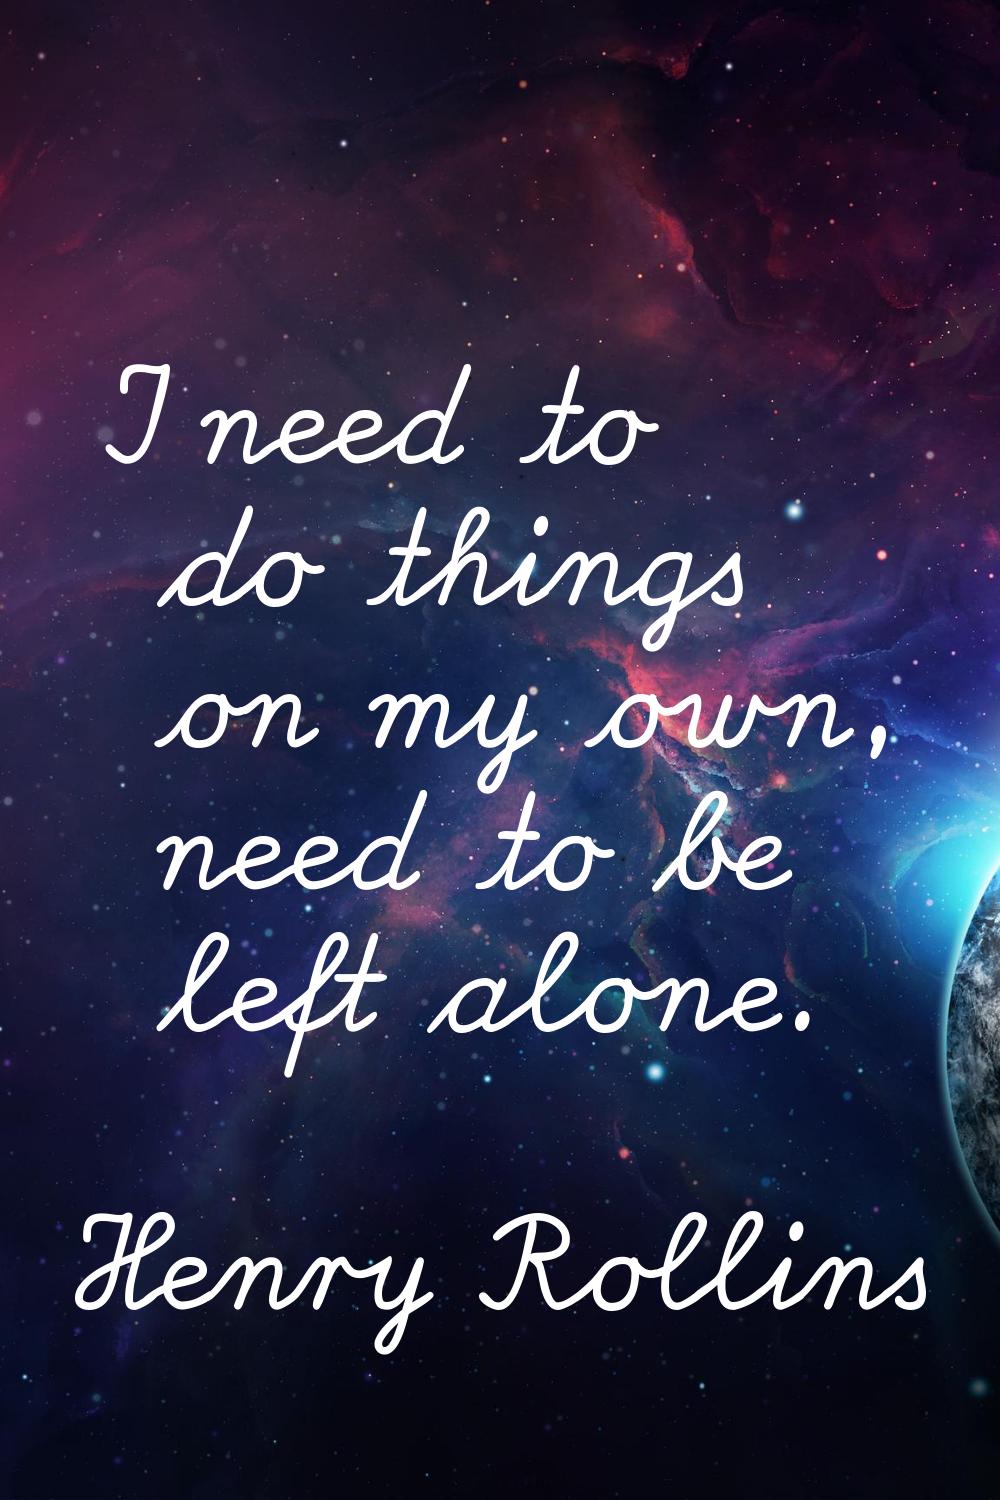 I need to do things on my own, need to be left alone.